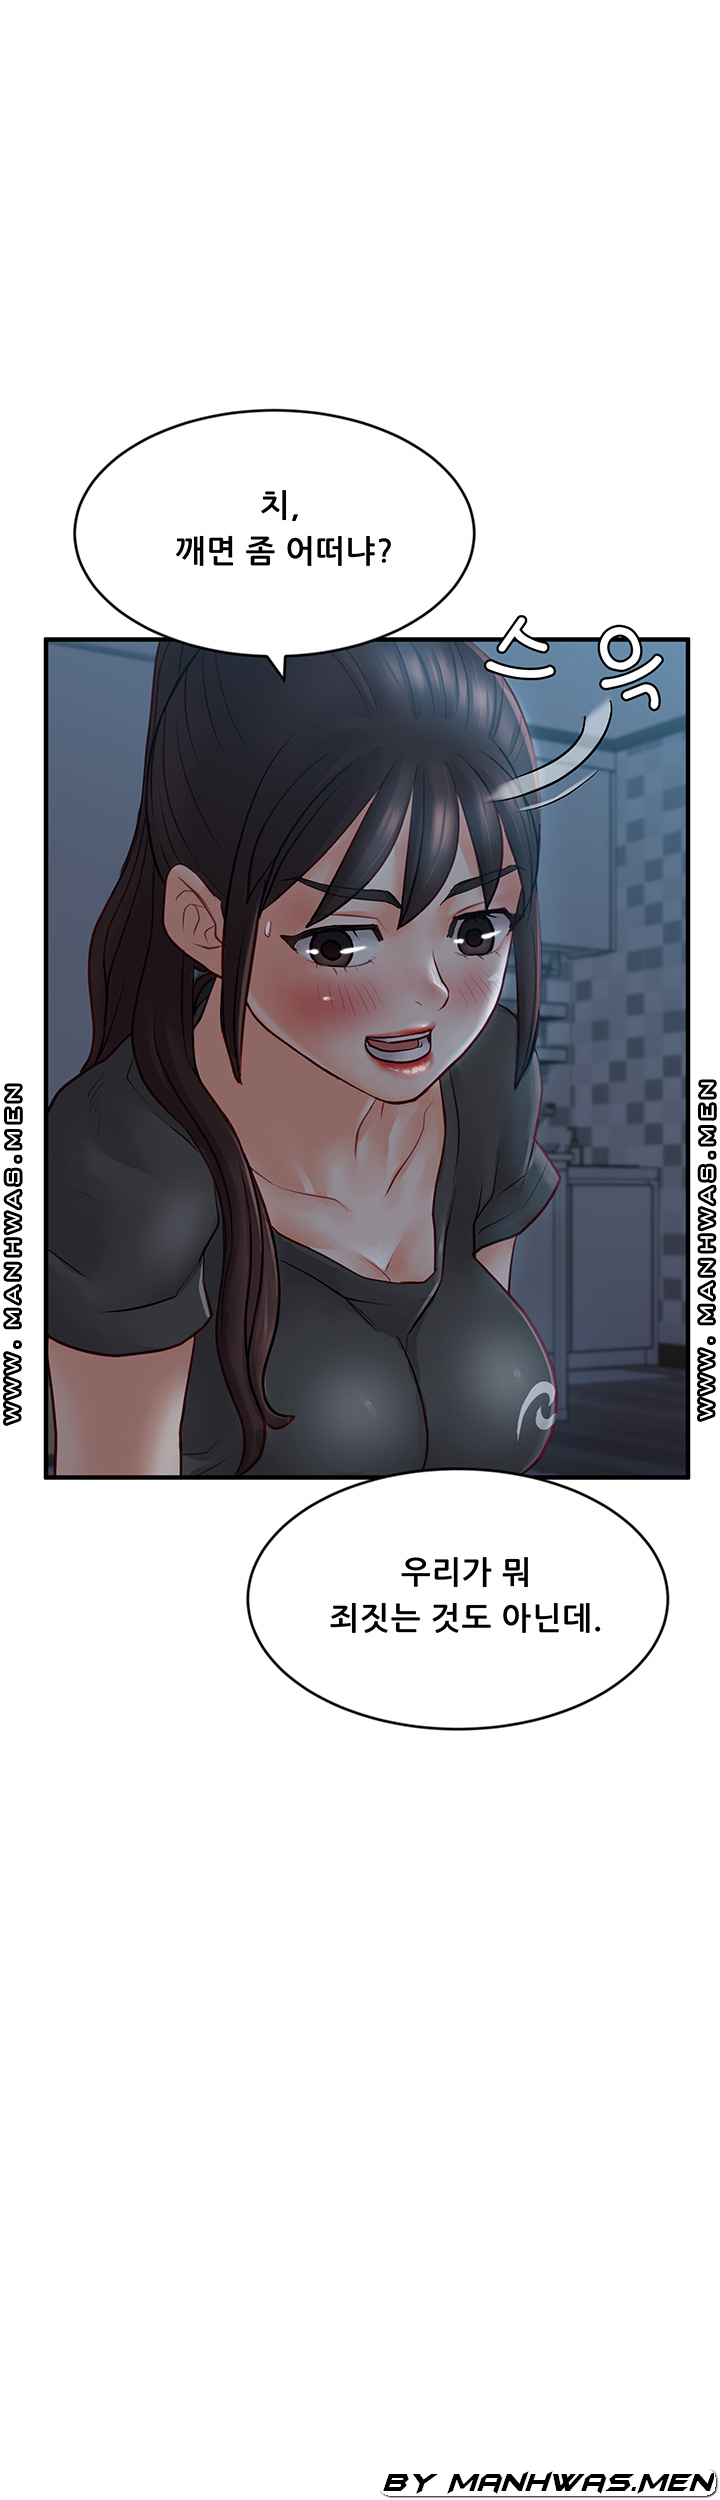 Broadcasting Club Raw - Chapter 9 Page 8